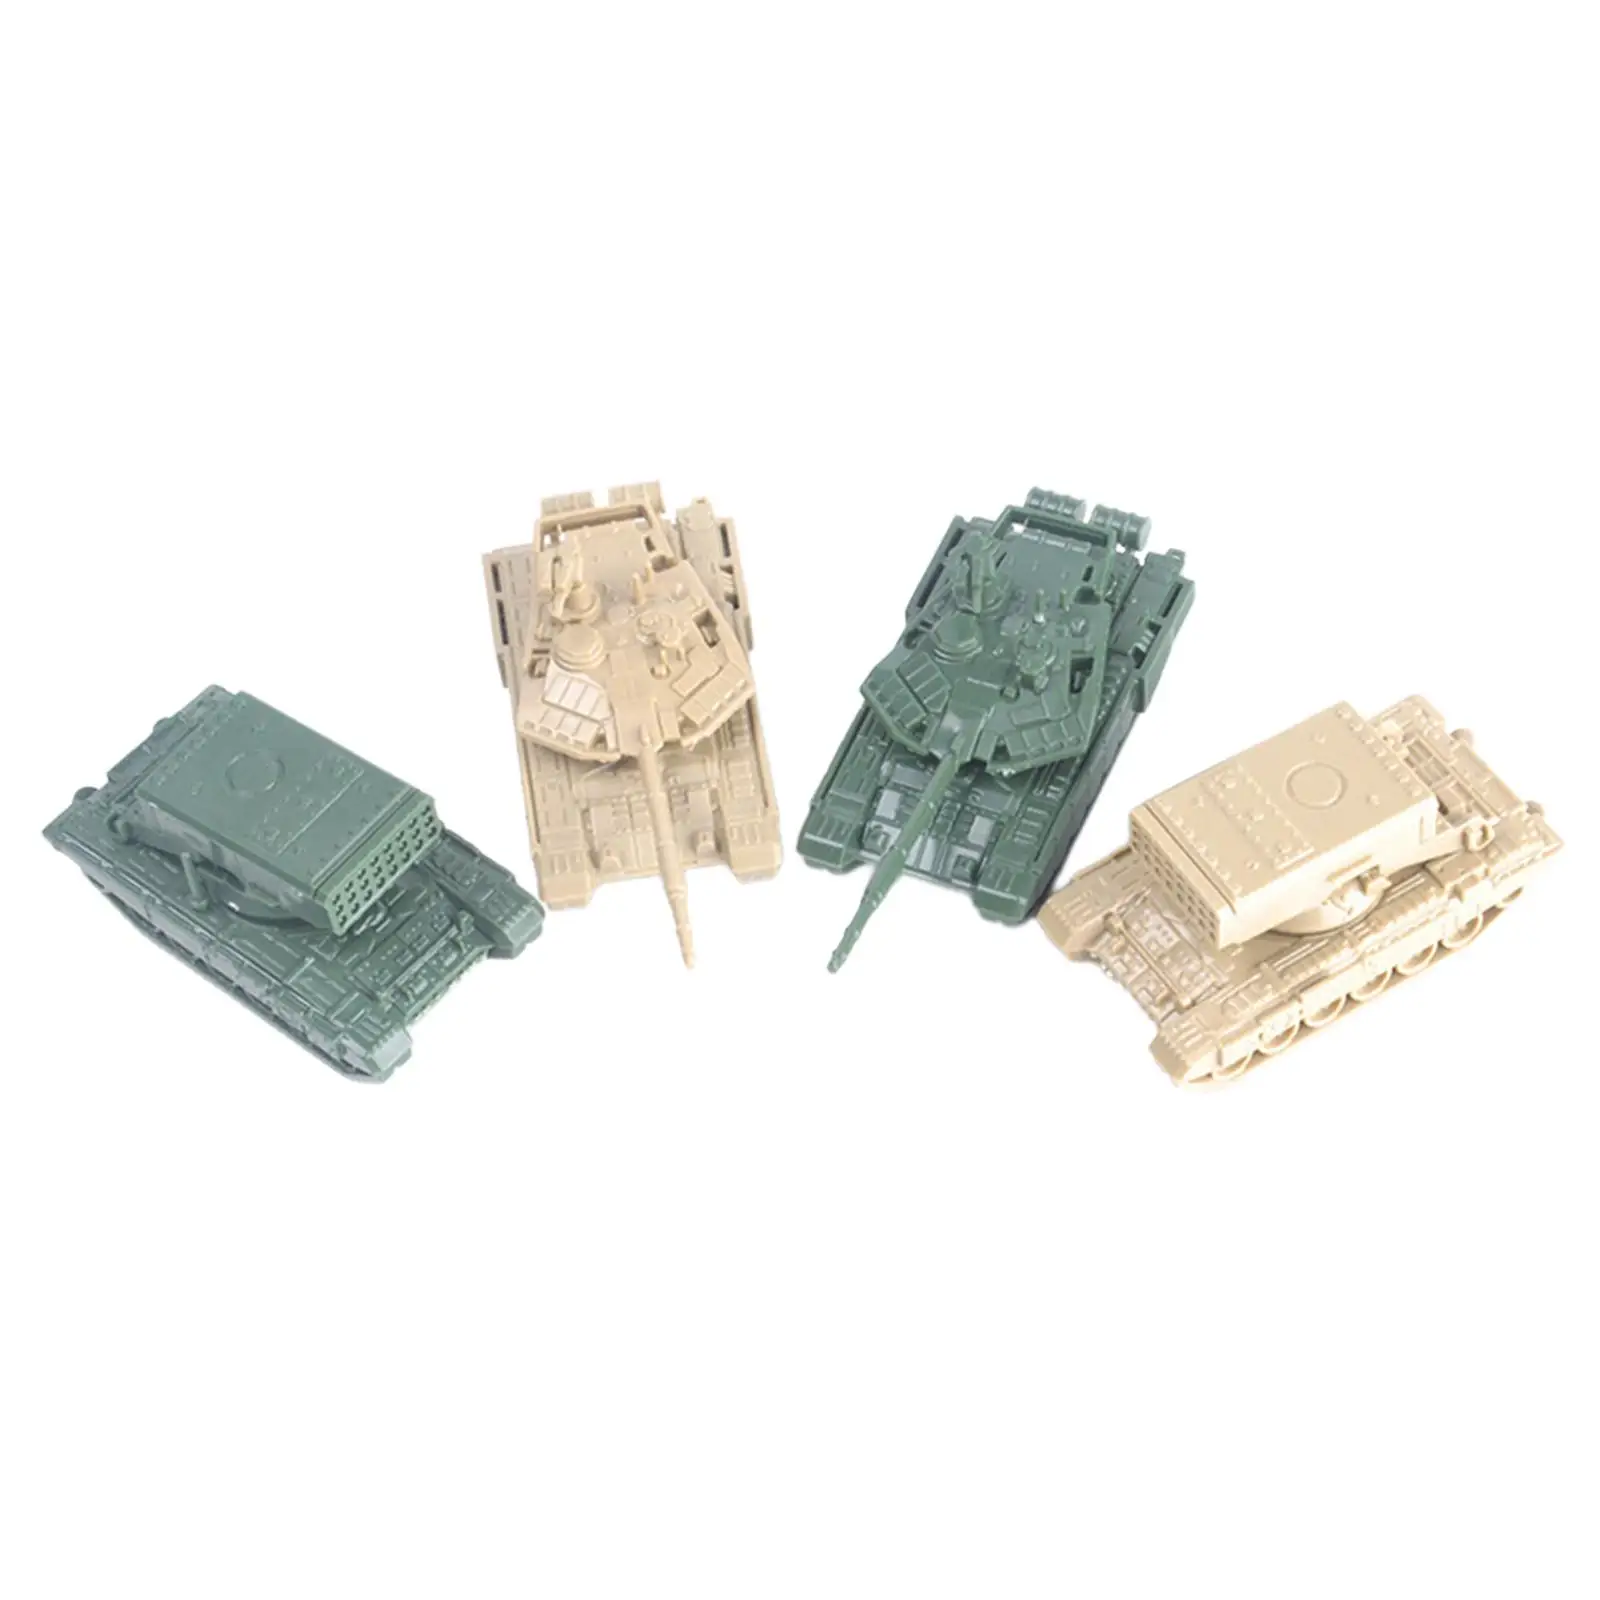 4x Armored Tank Model 1/144 Craft Miniature Tank Puzzle Tracked Crawler Chariot for Adults Party Favors Collection Children Gift